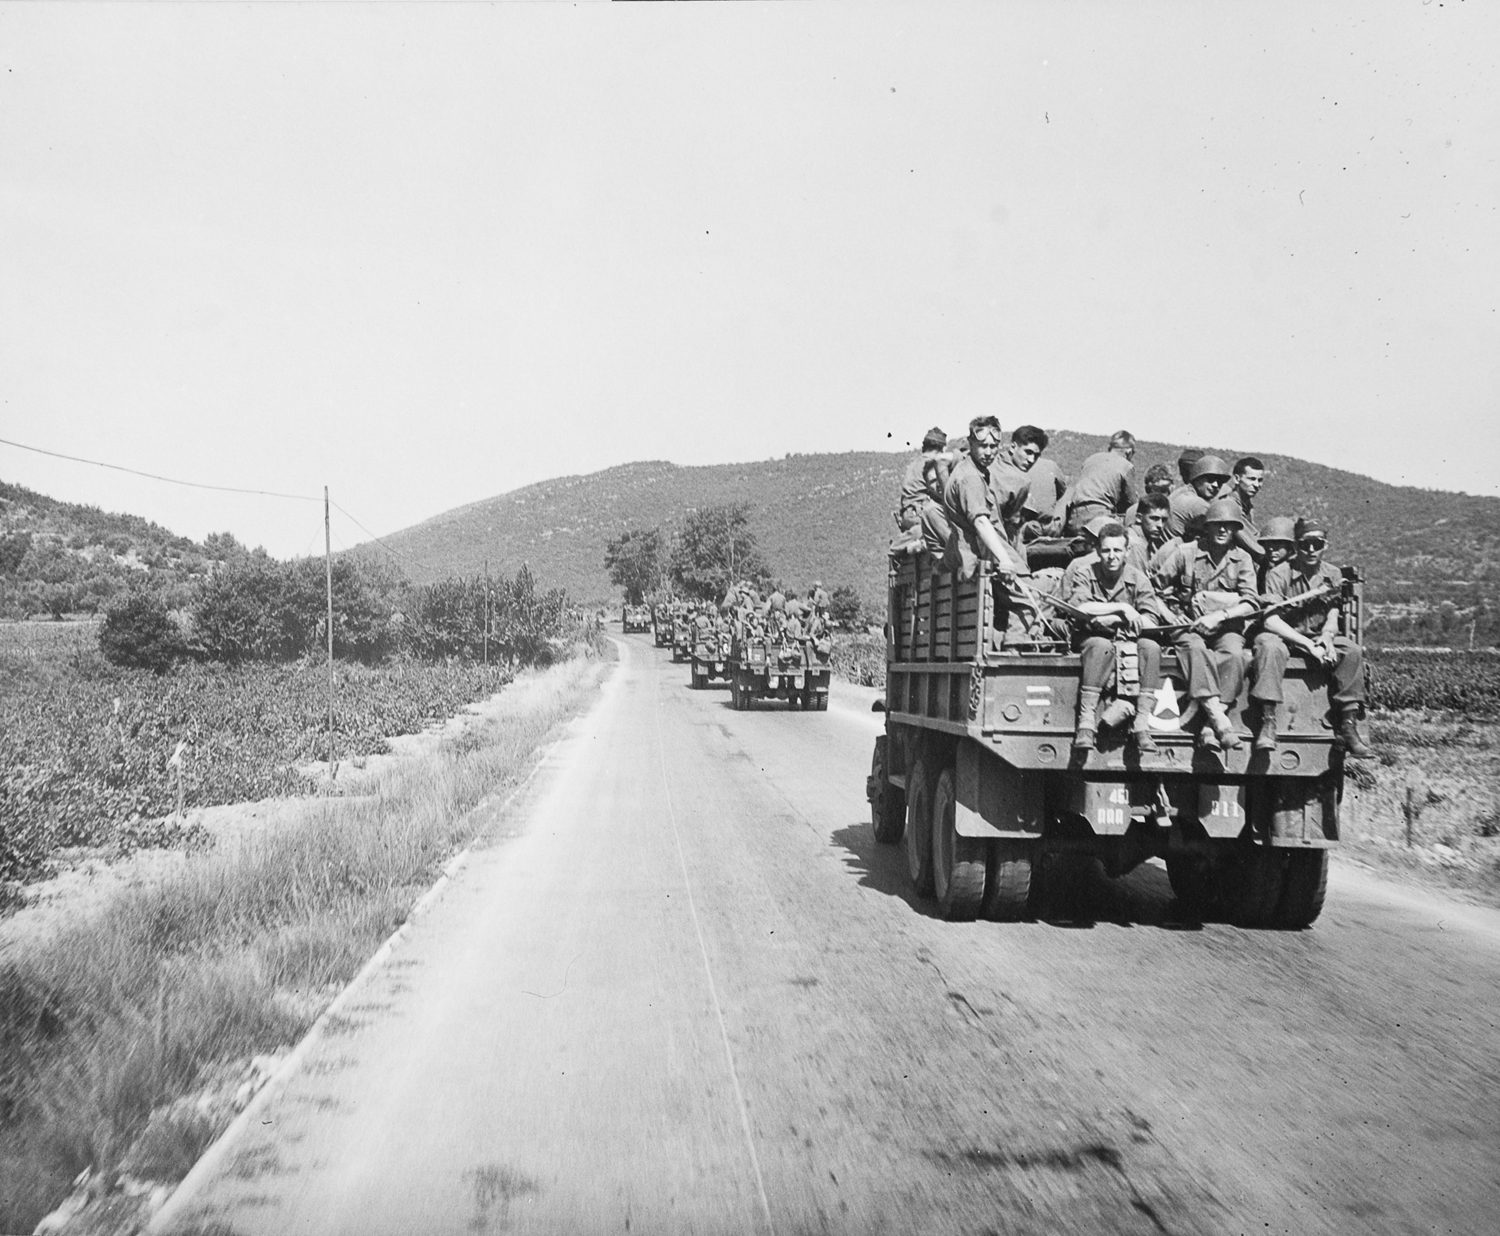 Allied invasion and liberation of southern France, 1944. (Exact date unknown)